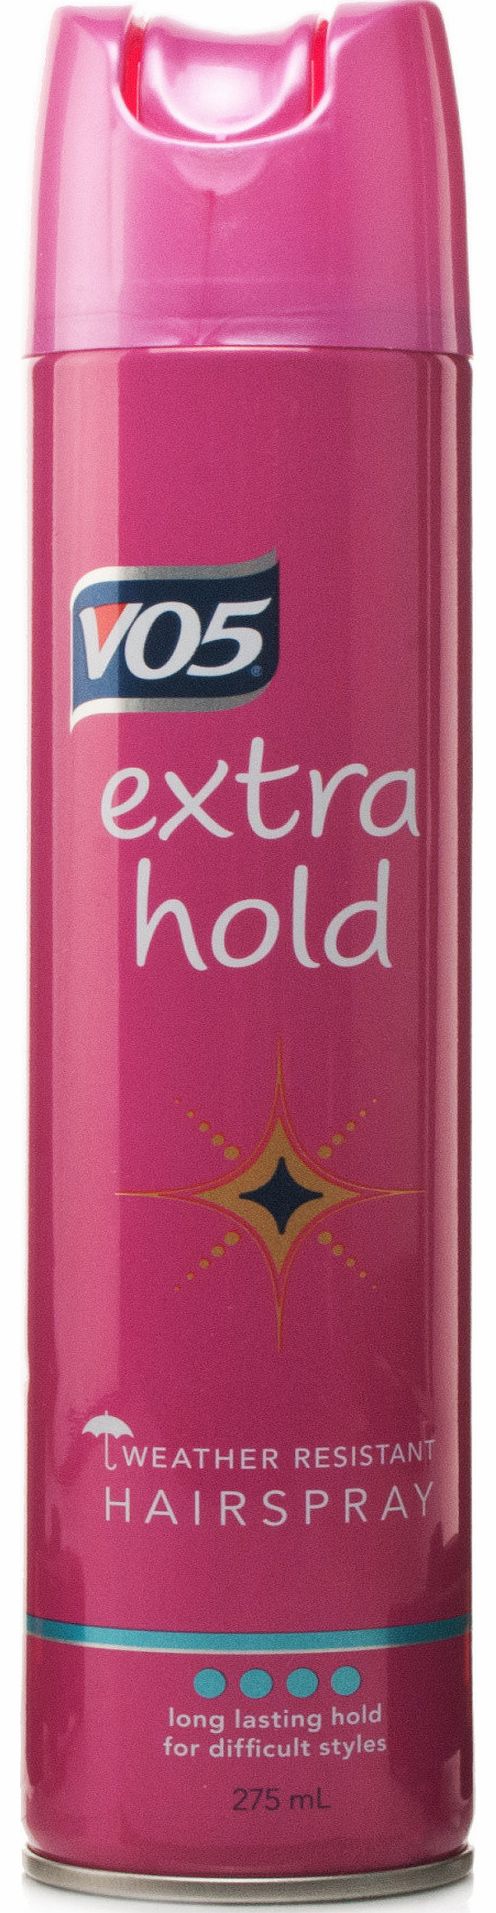 Extra Hold Weather Resistant Hairspray